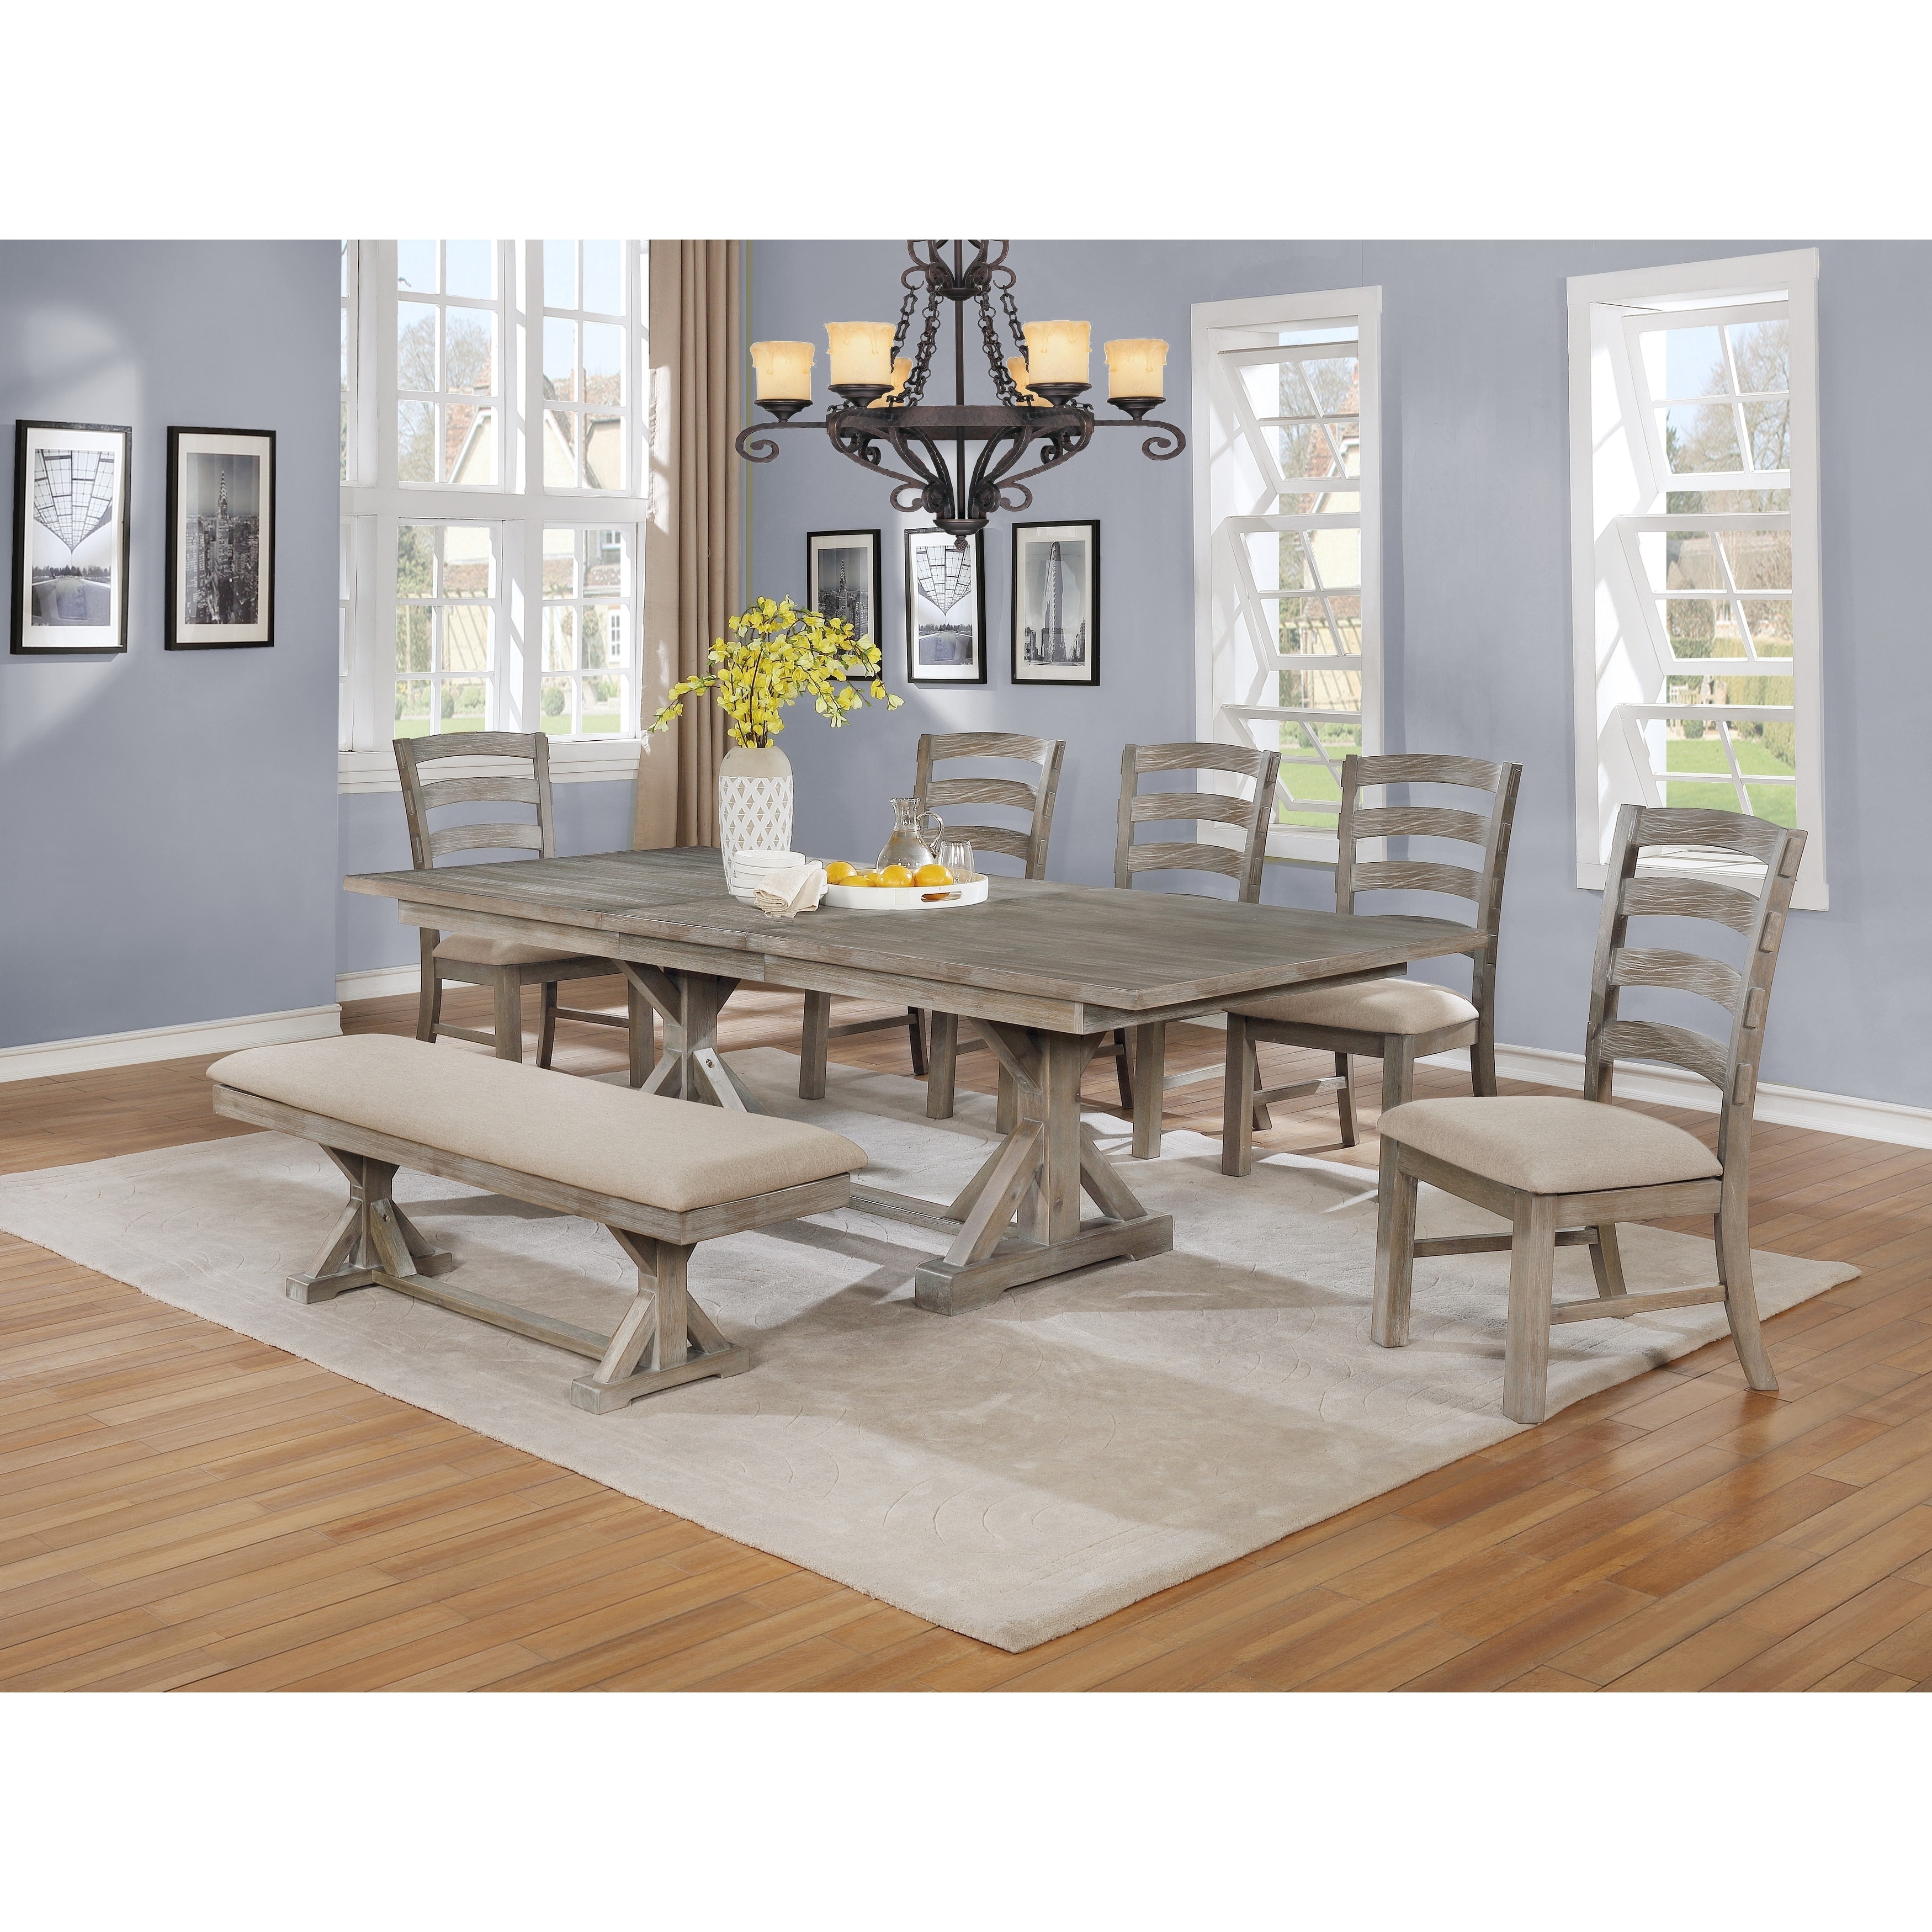 Rustic 7 Piece Dining Set on Sale, UP TO 69% OFF | www.aramanatural.es